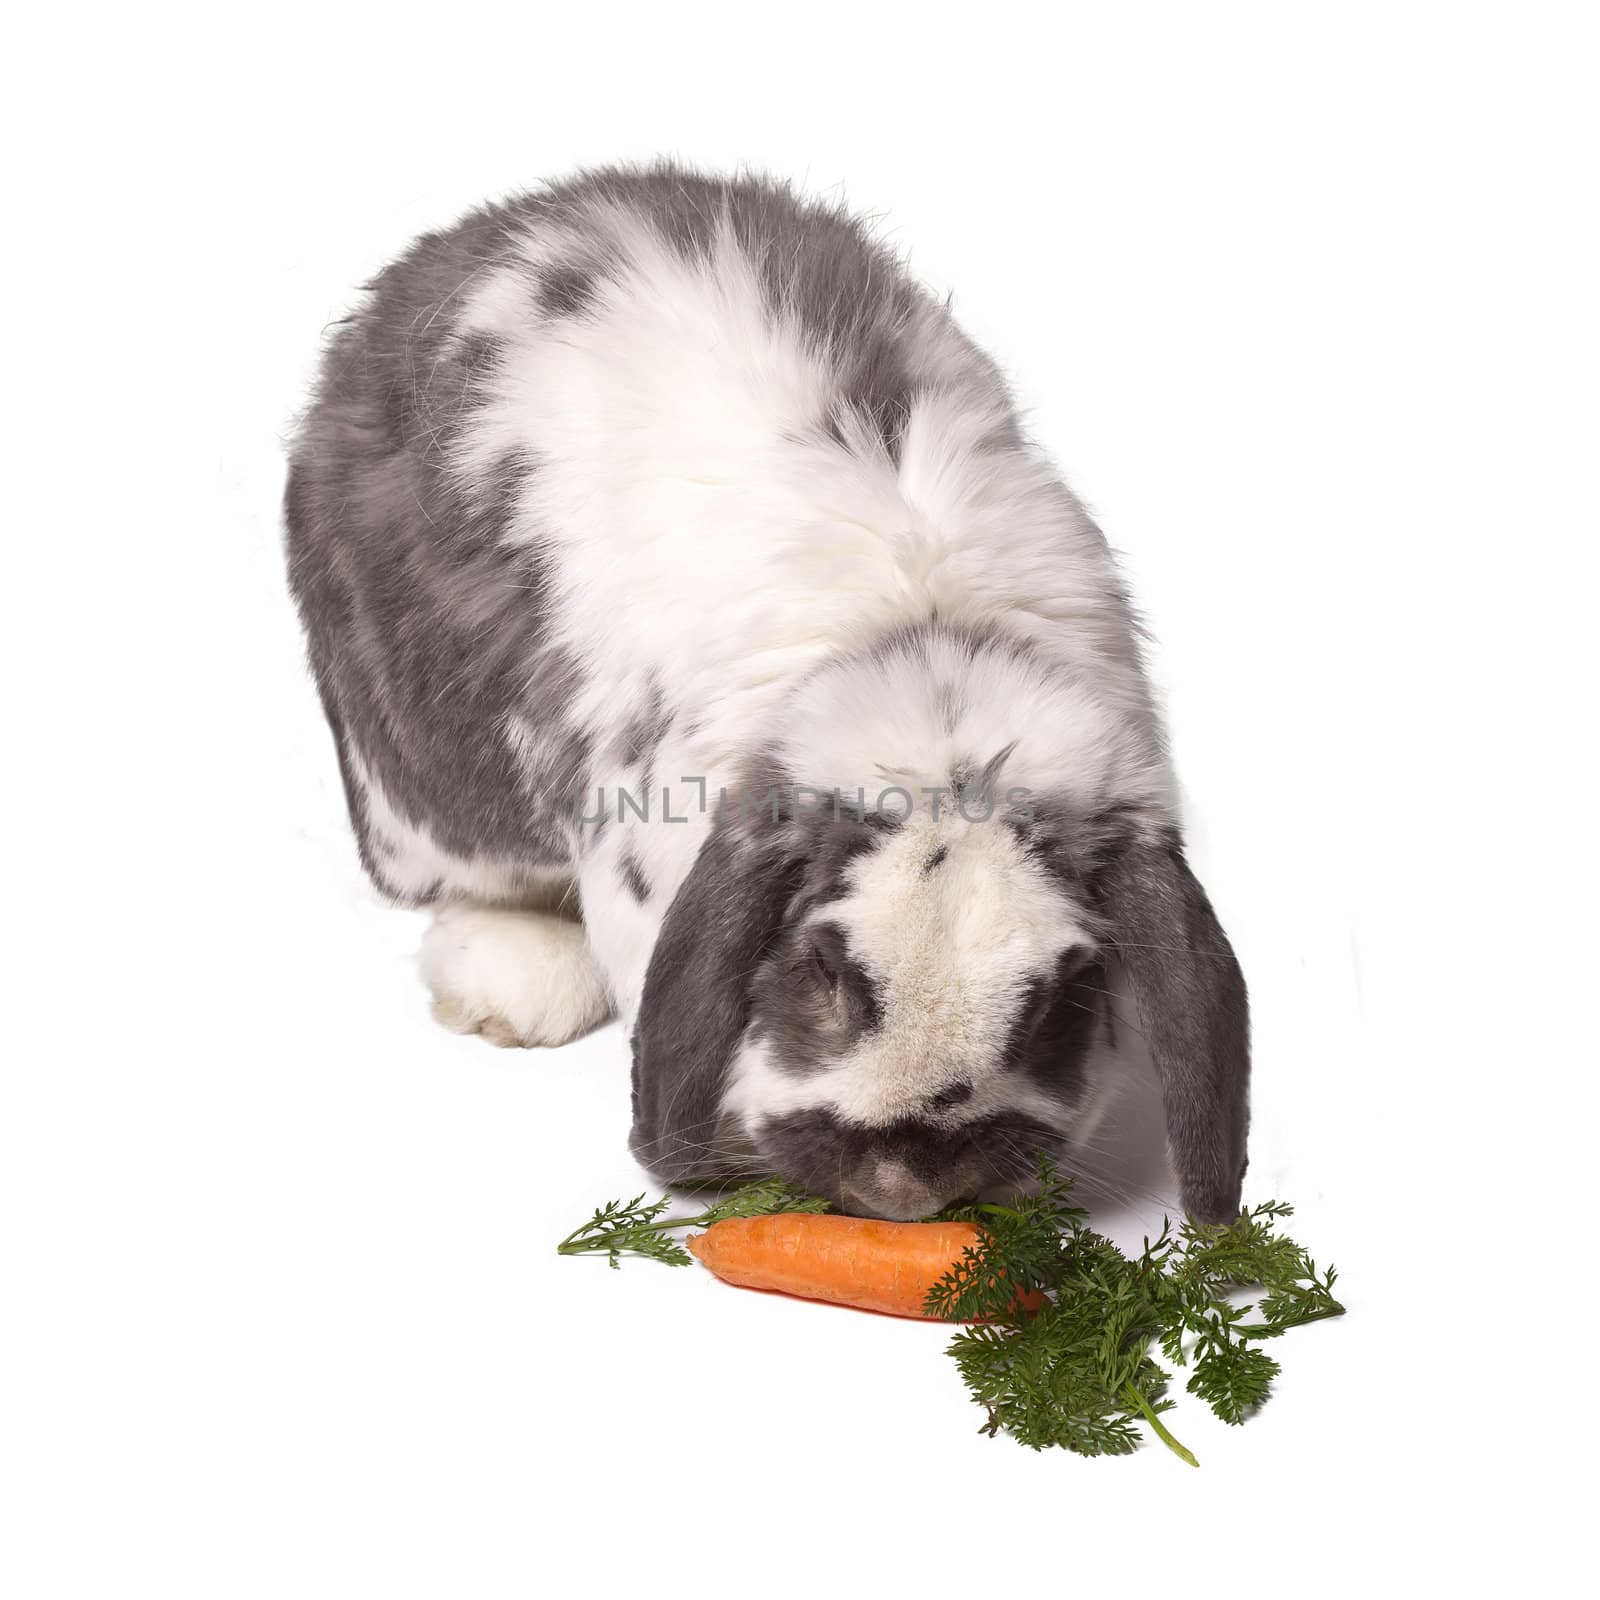 Cute Grey and White Rabbit Bending Down to Eat Carrot and Greens by scheriton